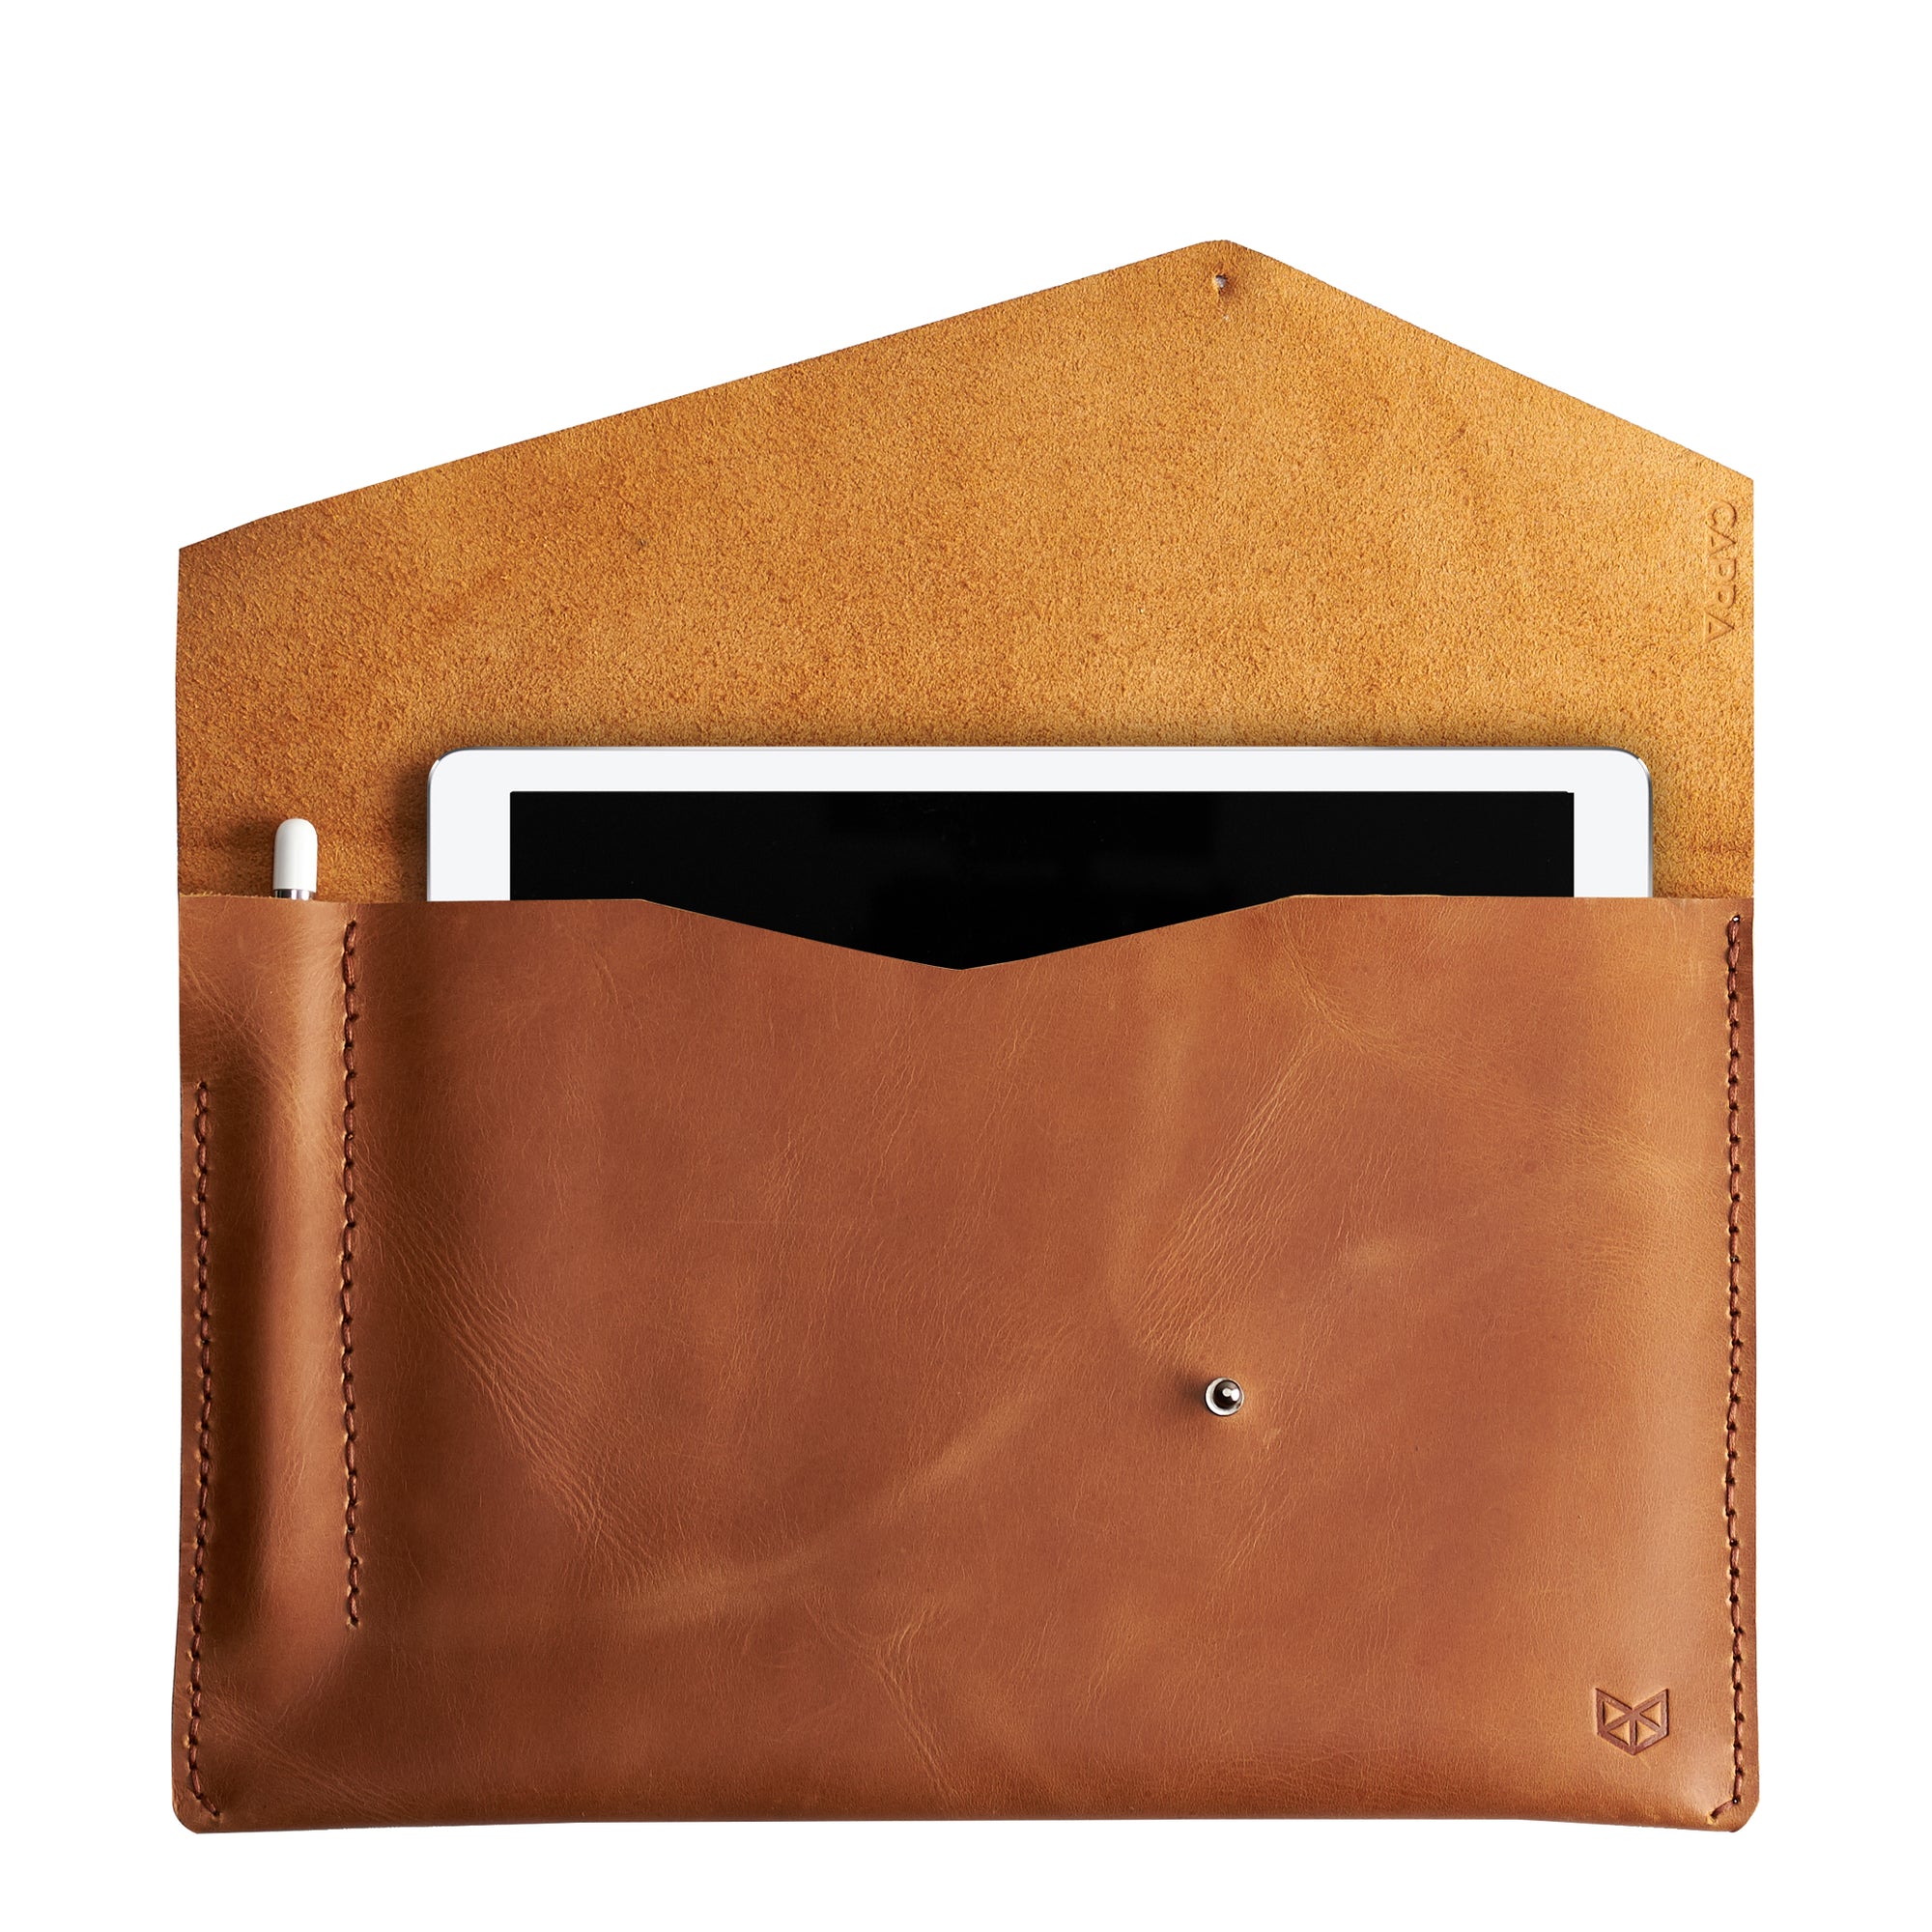 Style front view. Light brown draftsman 5 case by Capra Leather. Microsoft Surface sleeve.